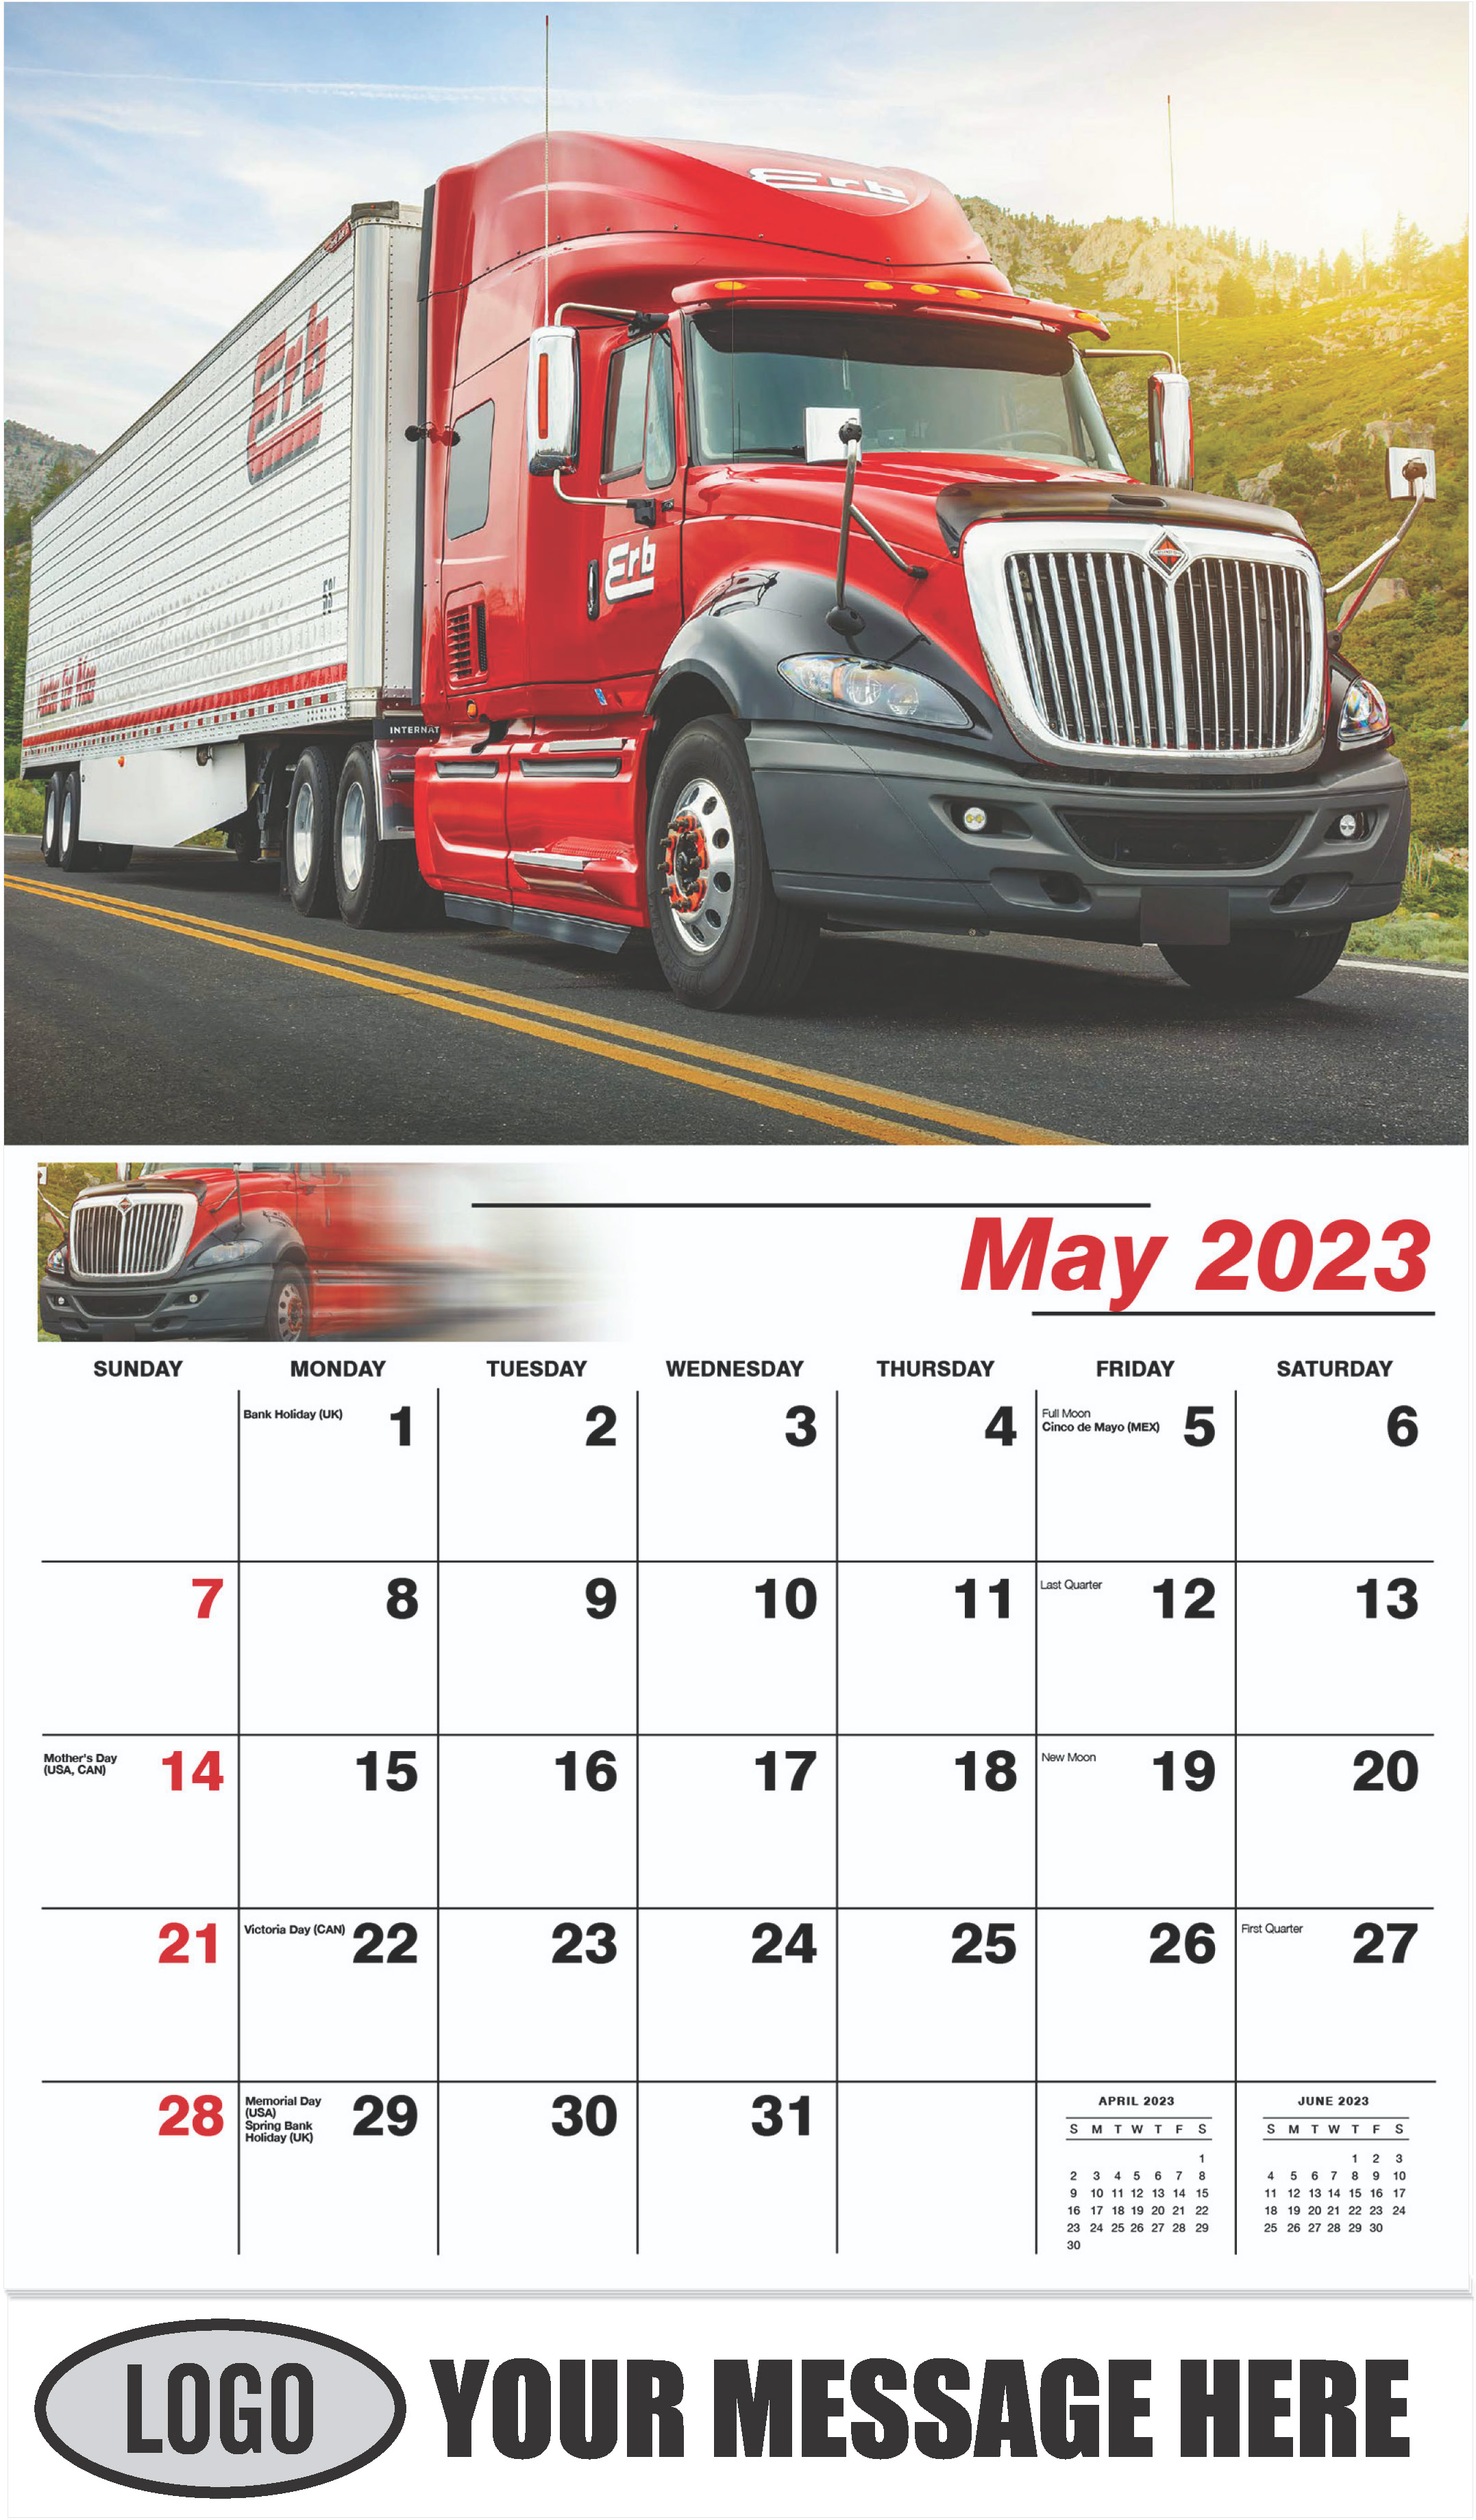 2018 International Prostar - May - Kings of the Road 2023 Promotional Calendar